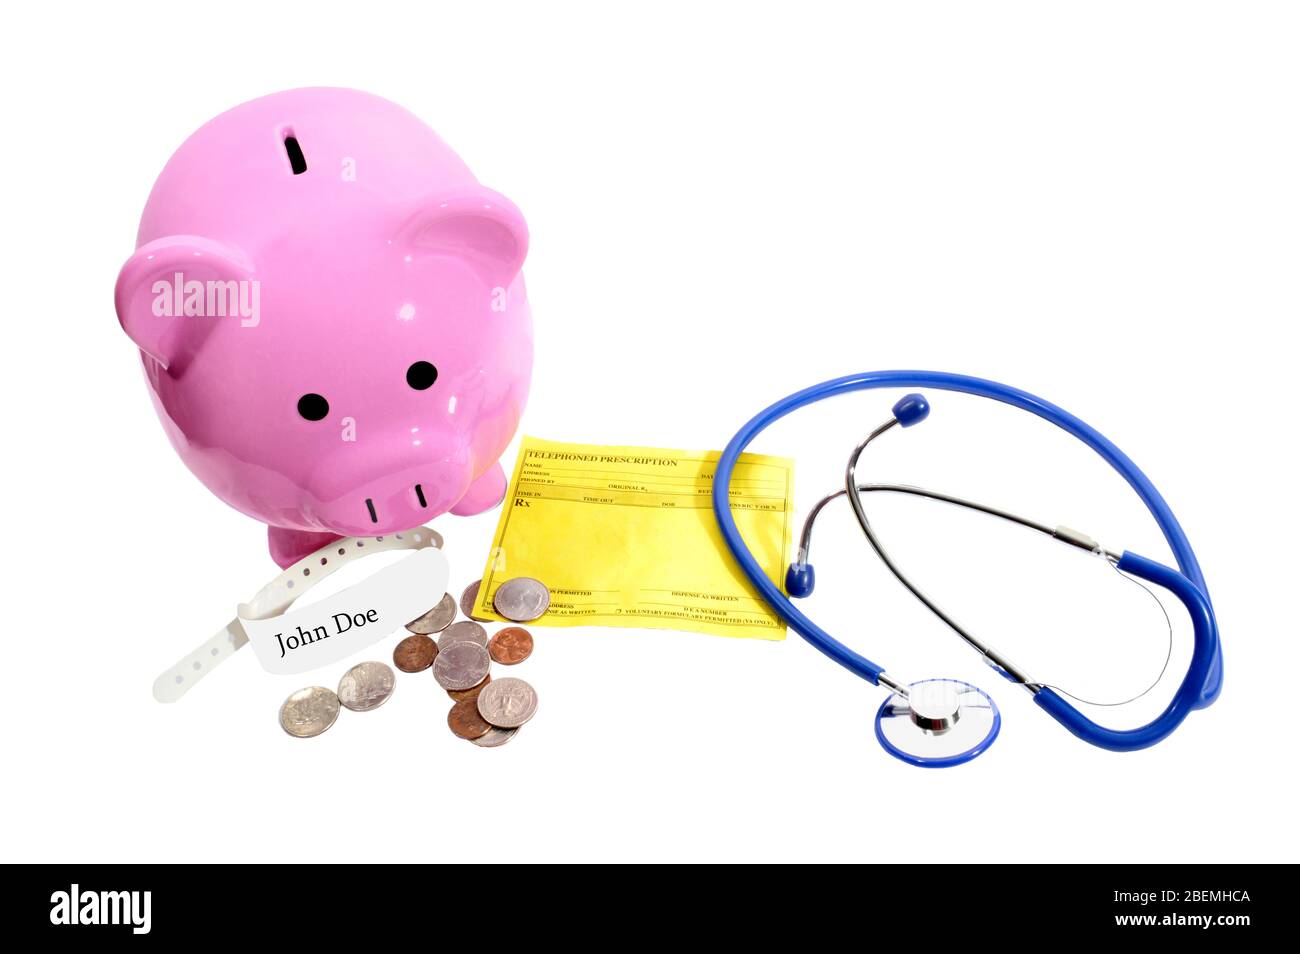 Horizontal shot of a pink piggy bank with a blue stethoscope, coins, and a prescription pad.  White background. Stock Photo